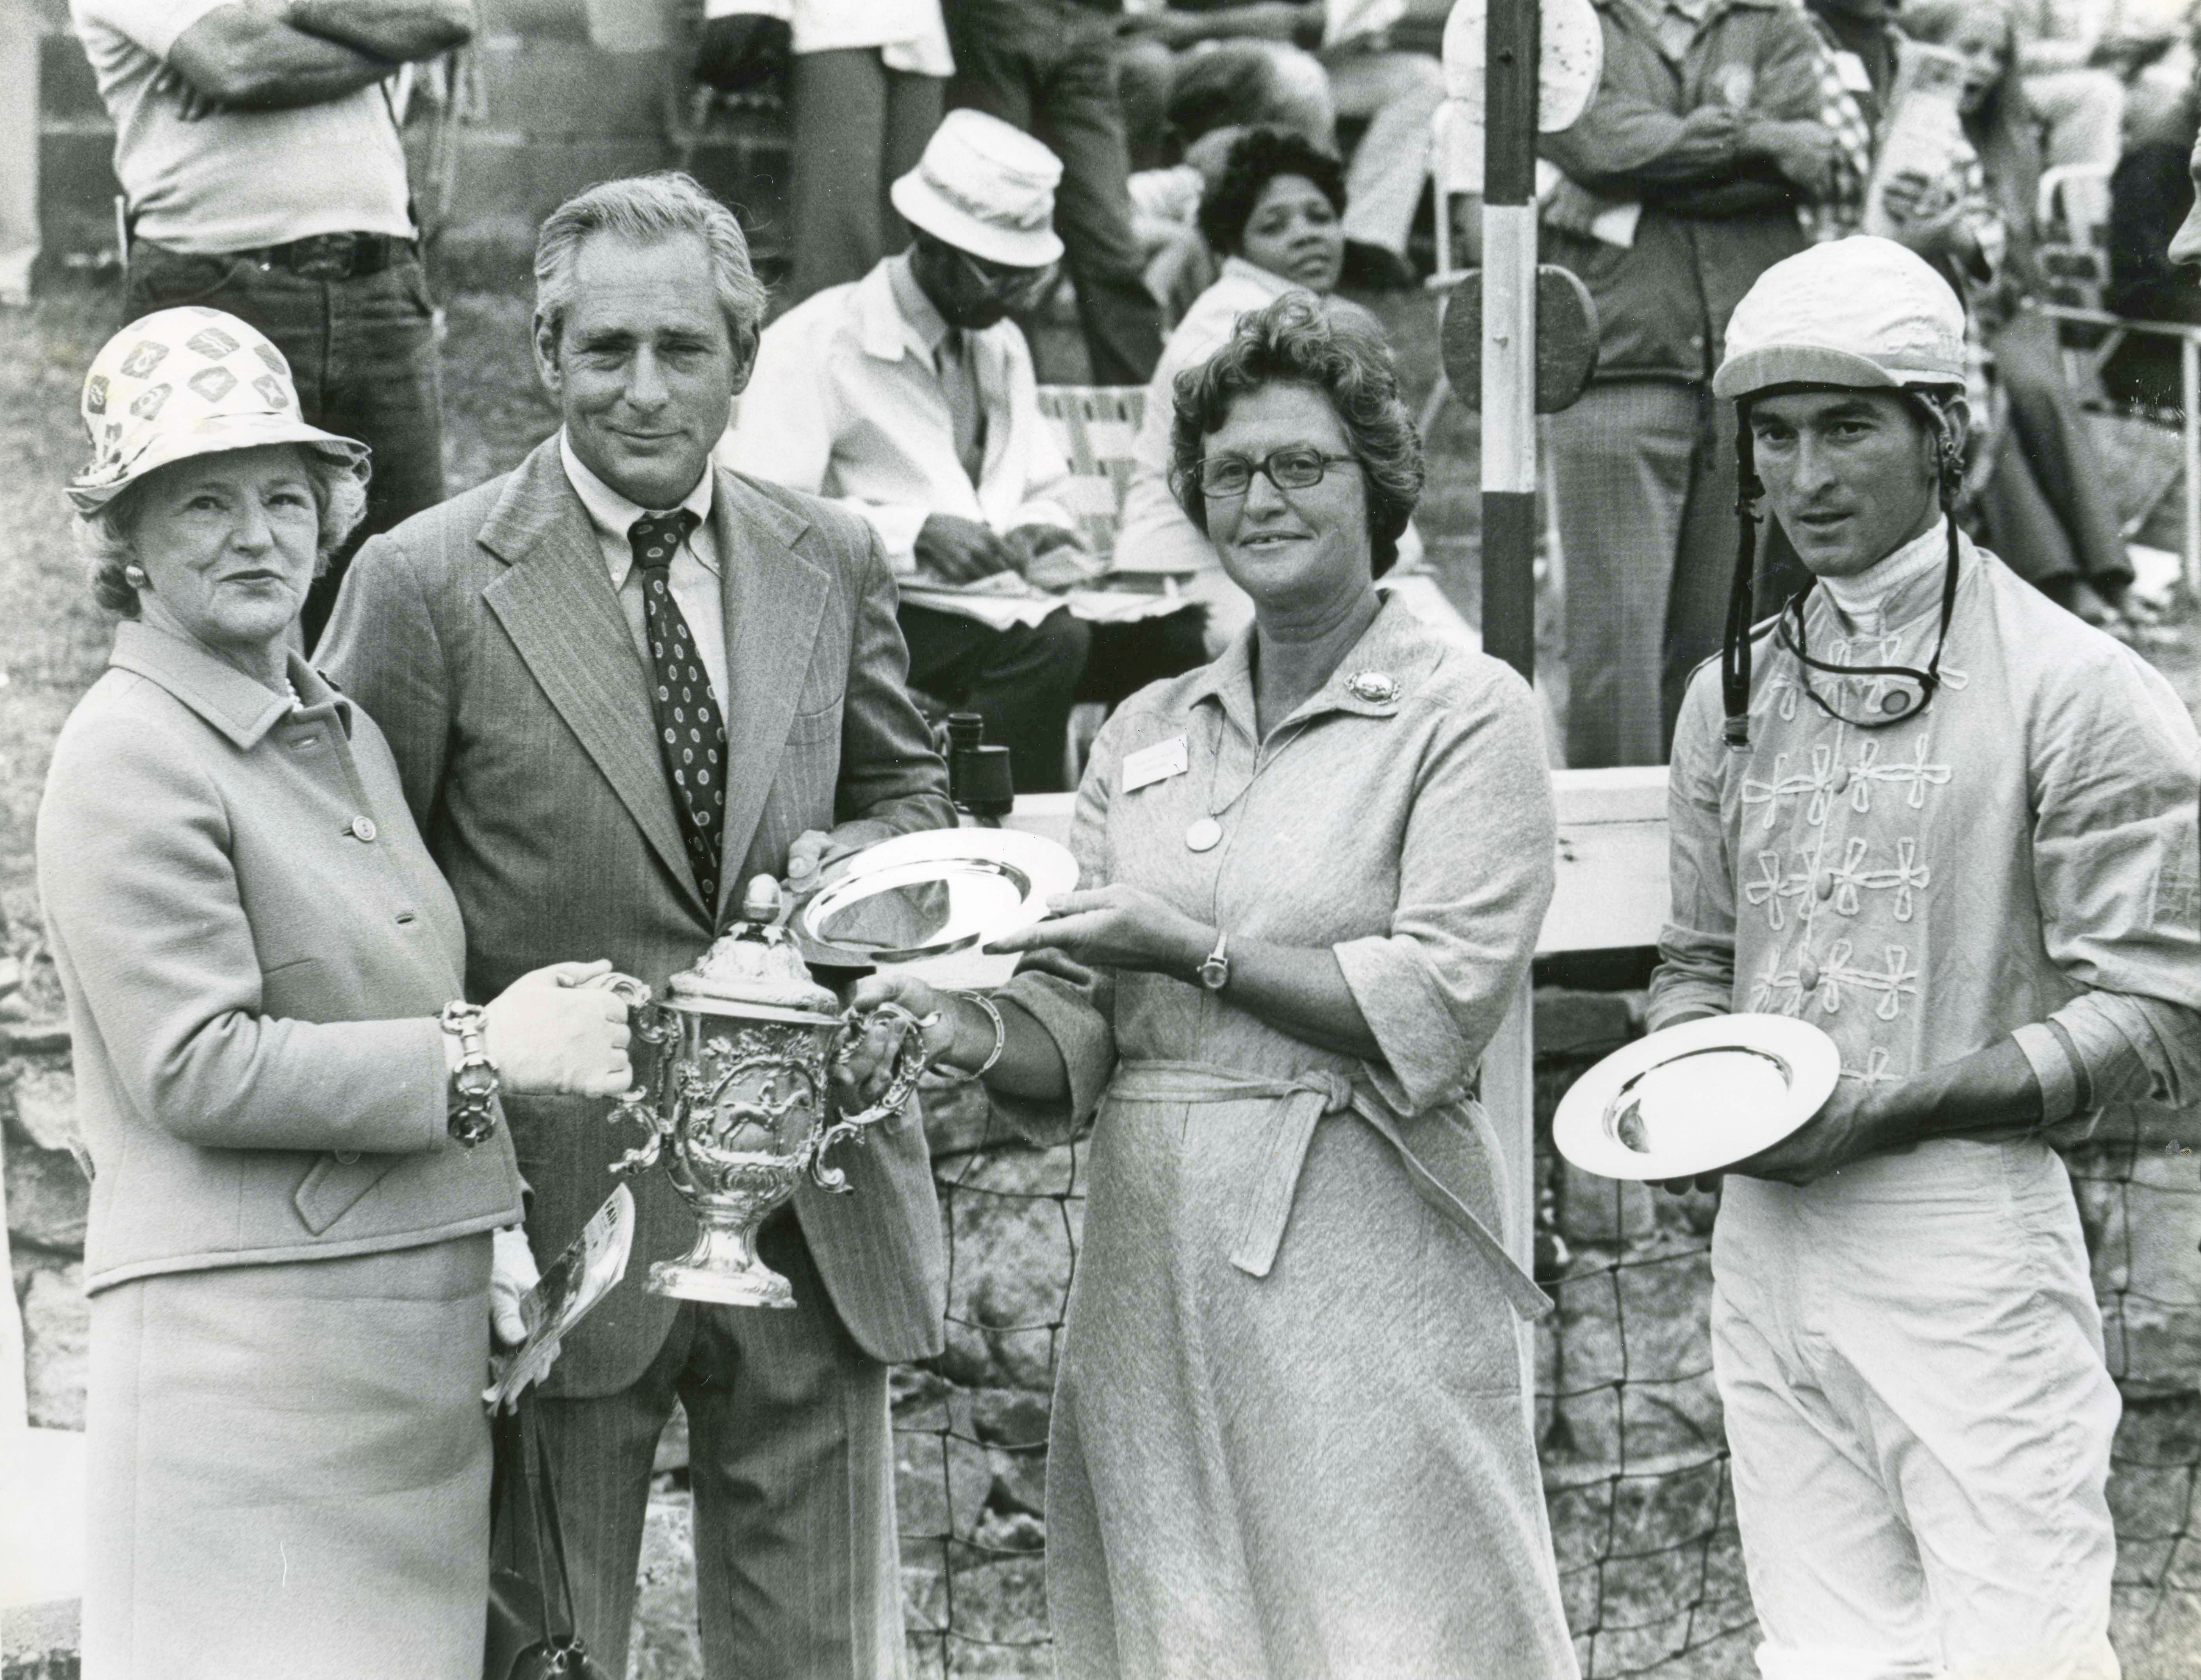 Jerry Fishback (on right) in winners circle with owner Mrs. Ogden Phipps and trainer D. M. Smithwick after the 1976 Grand National Steeplechase Handicap (Douglas Lees/Museum Collection)